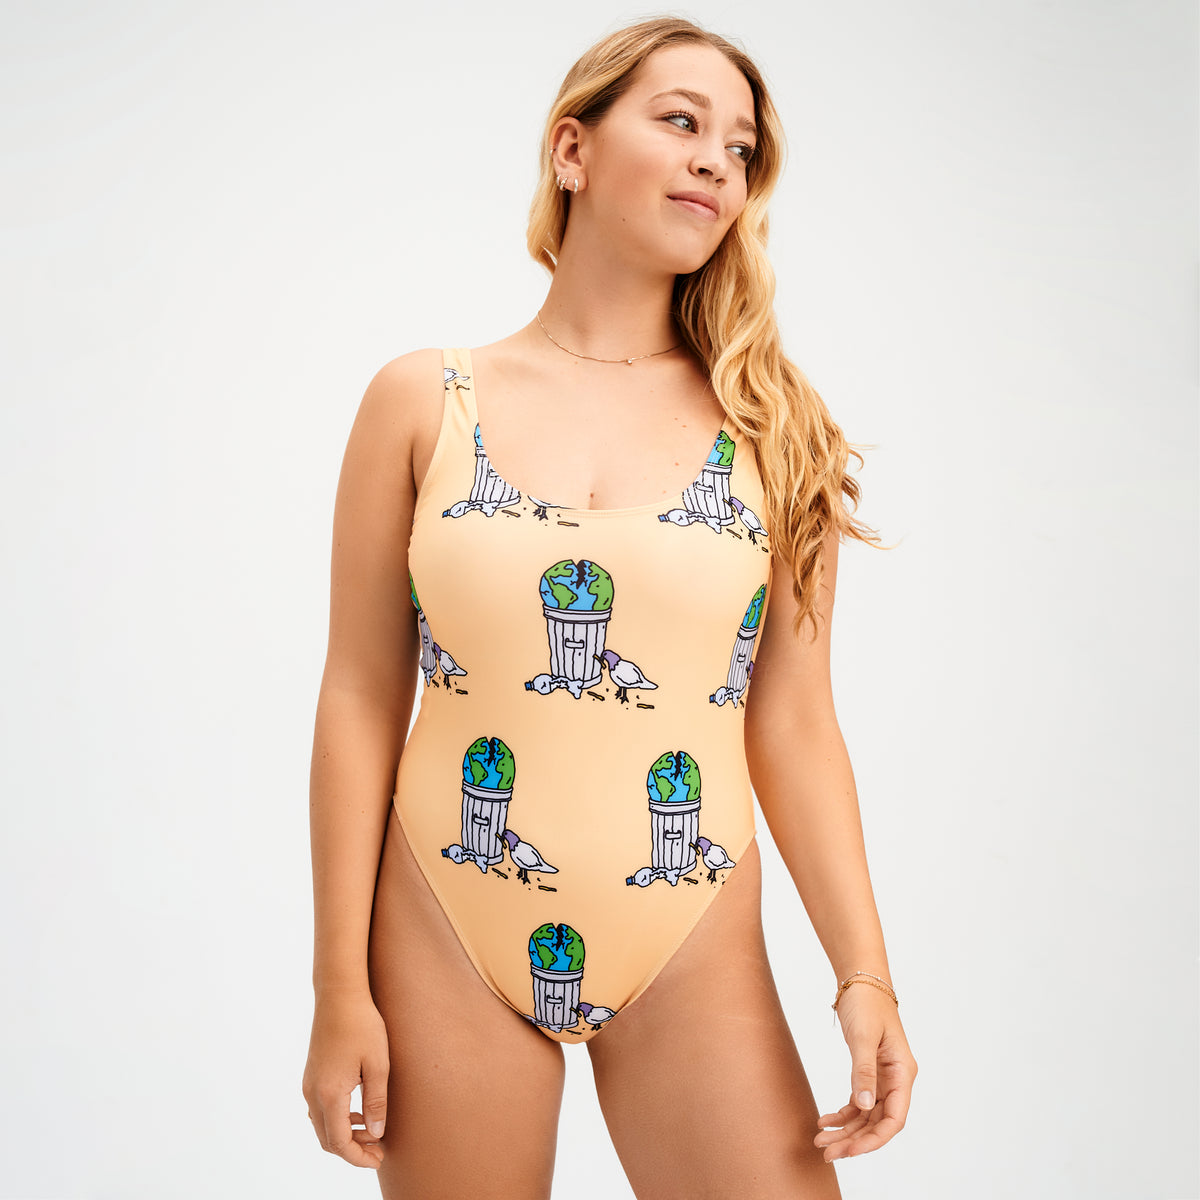 https://www.undz.shop/wp-content/uploads/1694/90/explore-bodysuit-brother-merle-orange-frites-undz-and-other-you-can-save-money-shopping-at-our-store_0.jpg